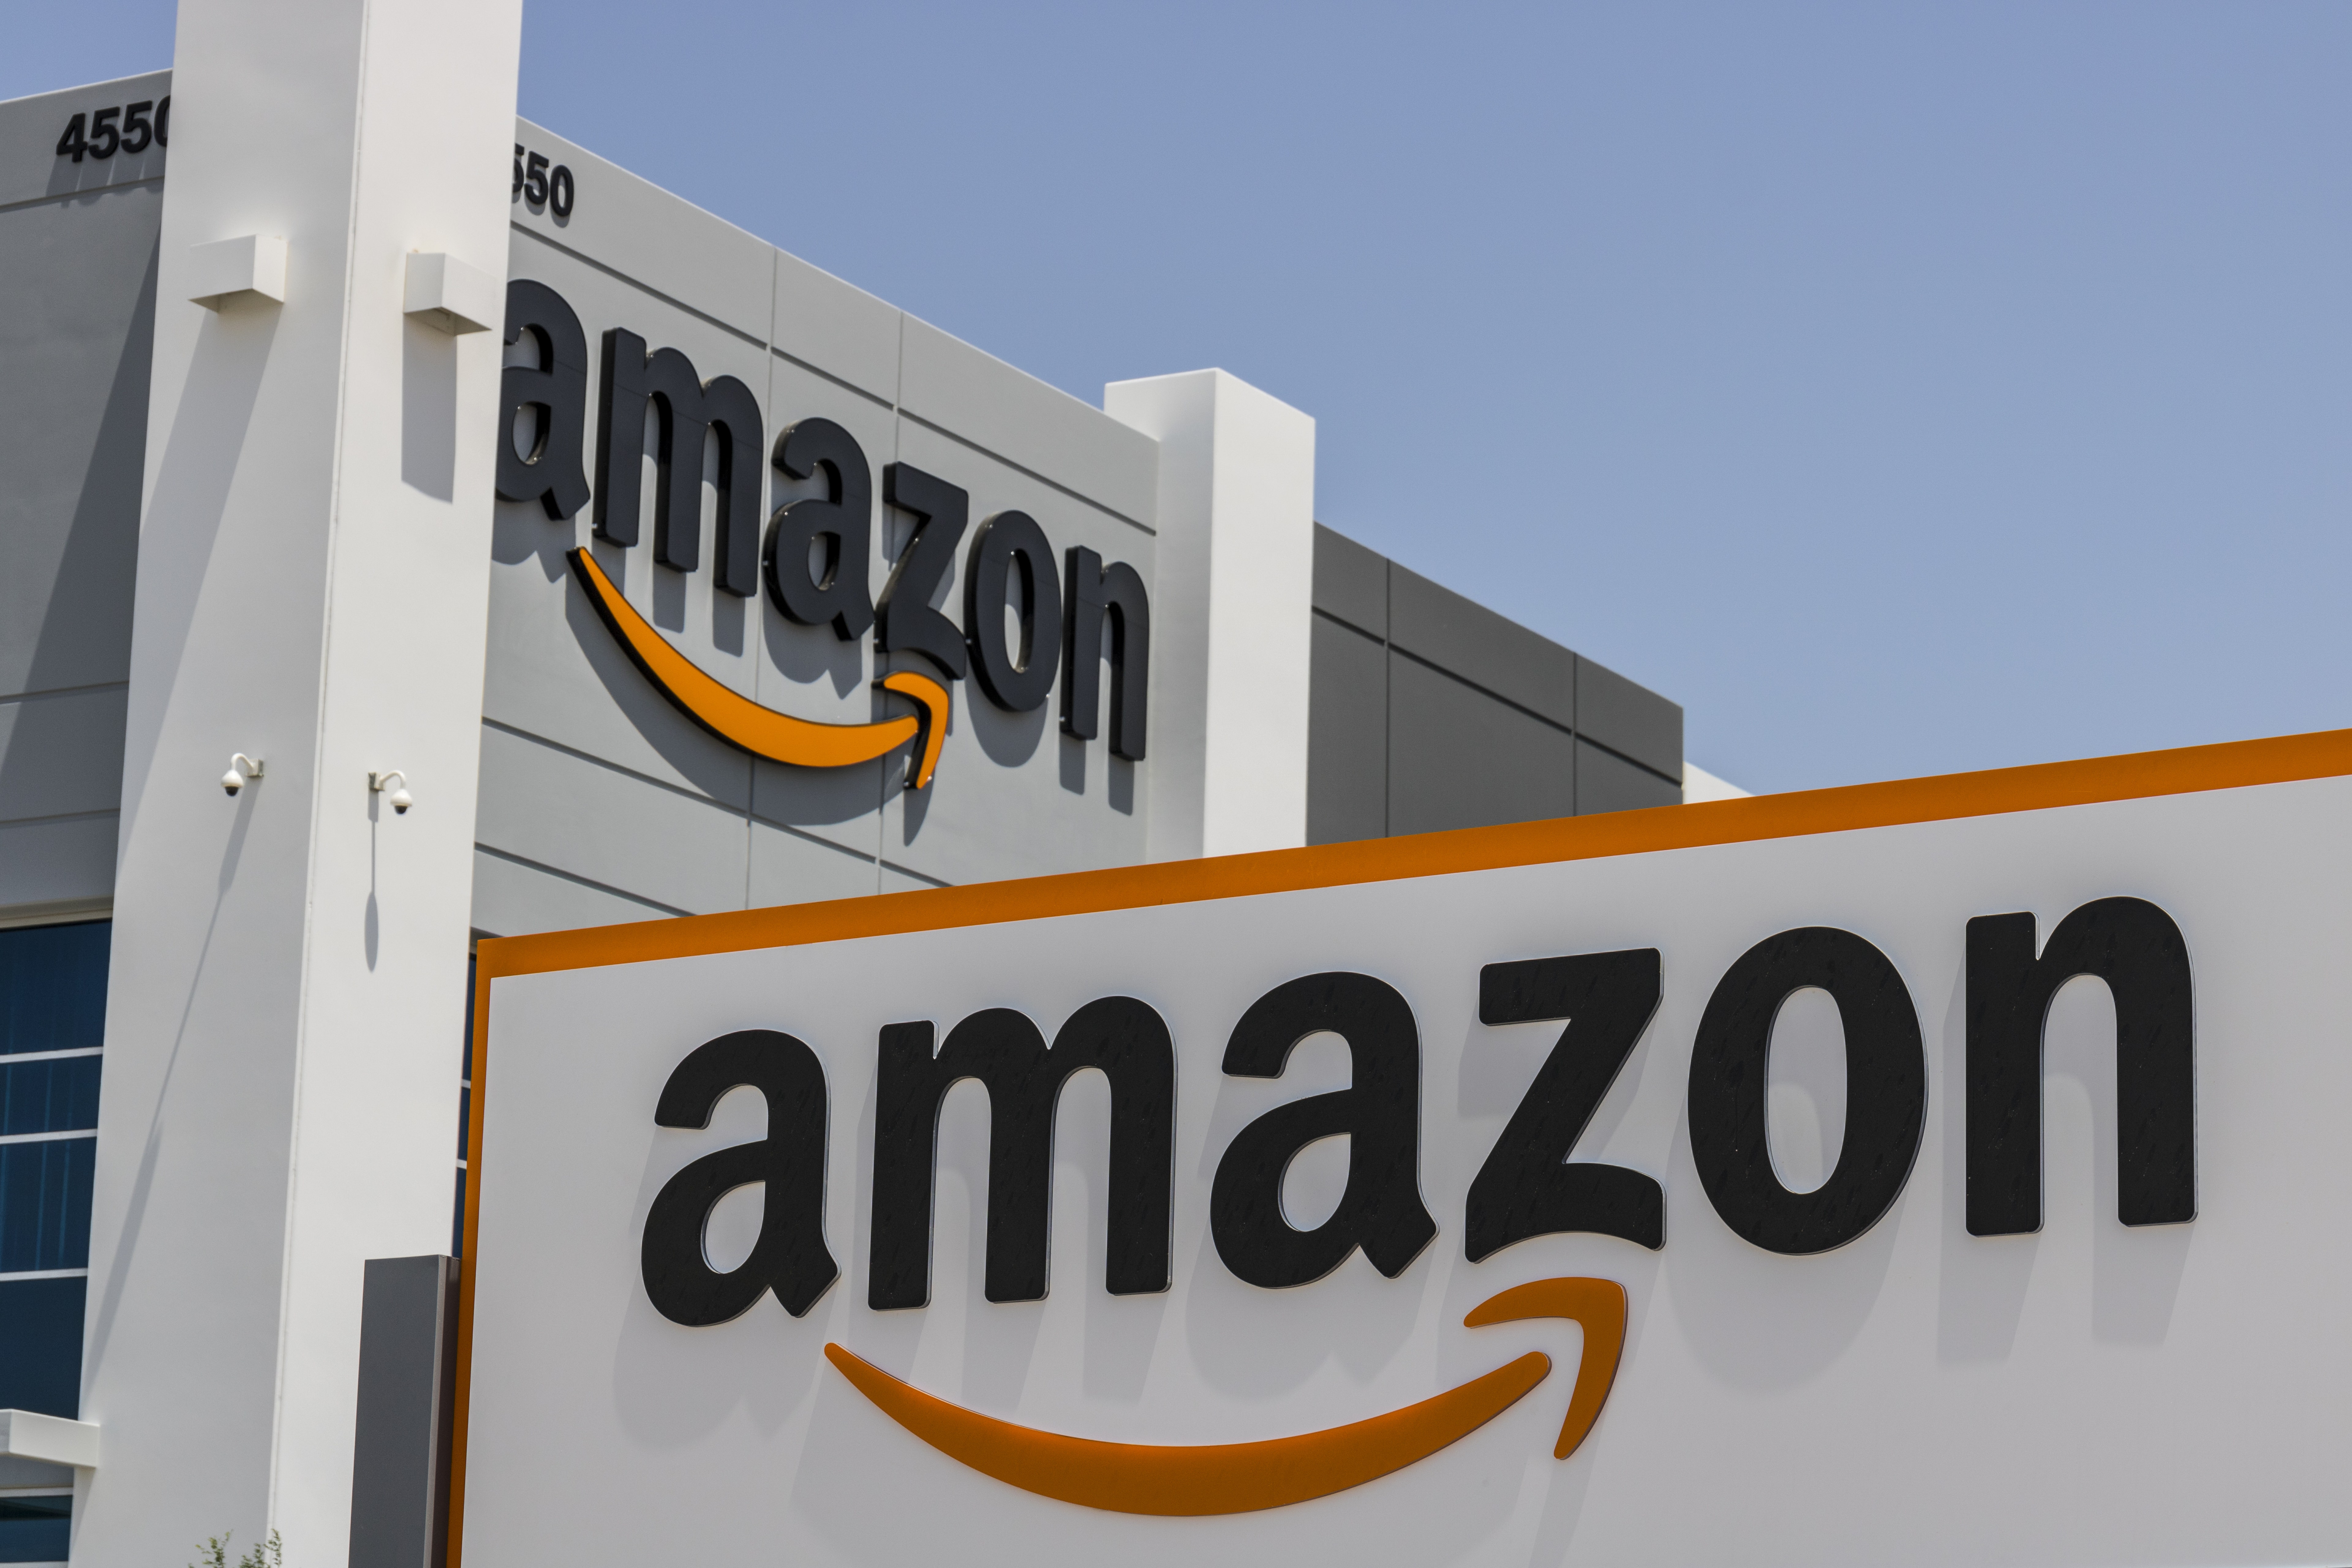 Amazon Calls For Support From Third-Party Sellers Against Antitrust Legislation